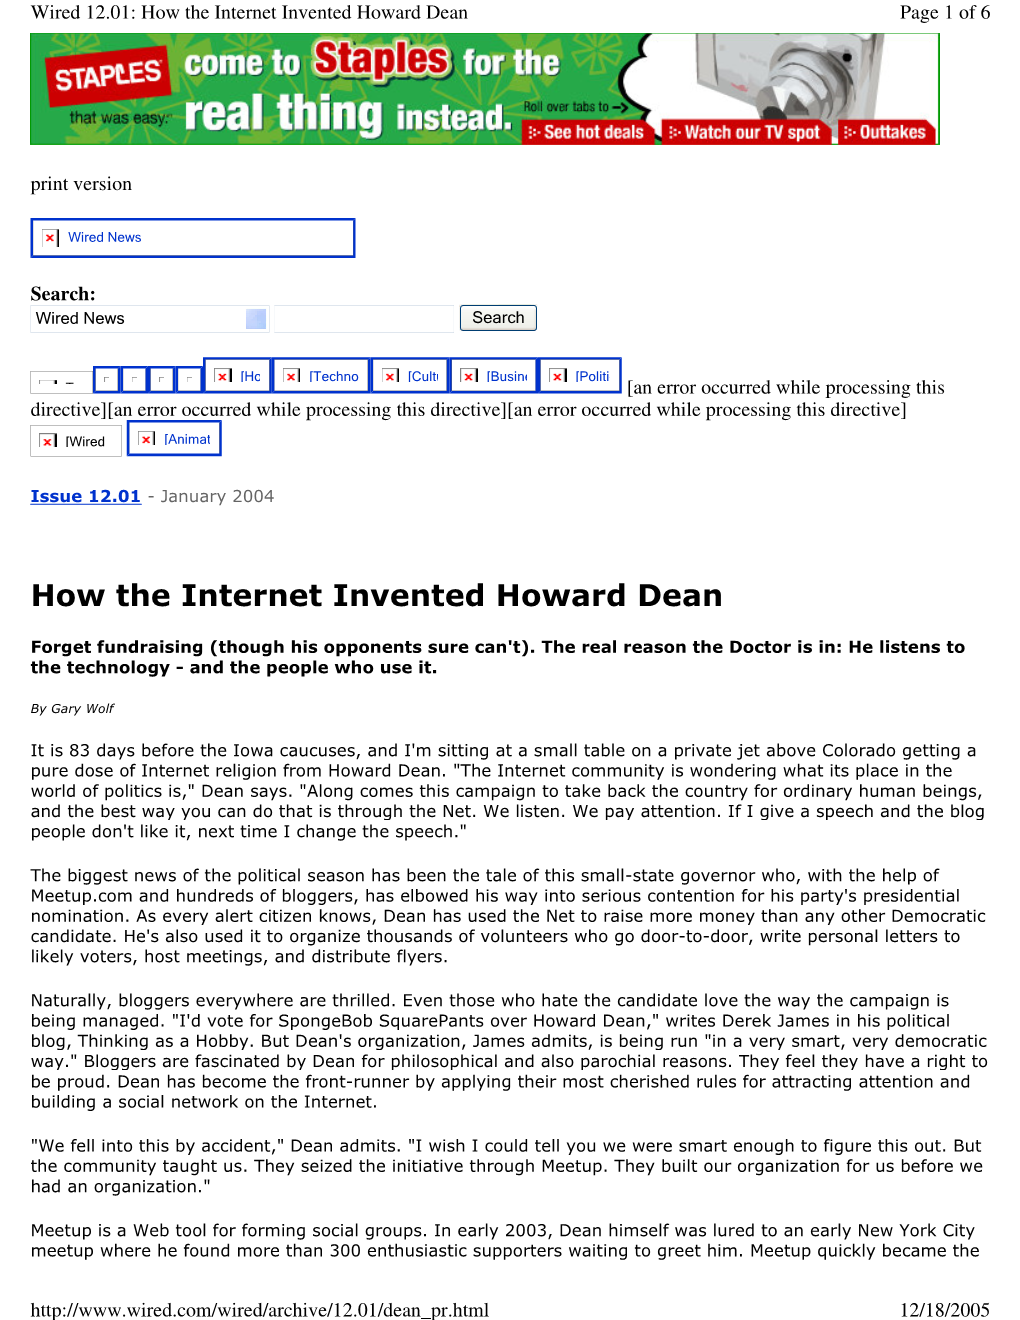 How the Internet Invented Howard Dean Page 1 of 6